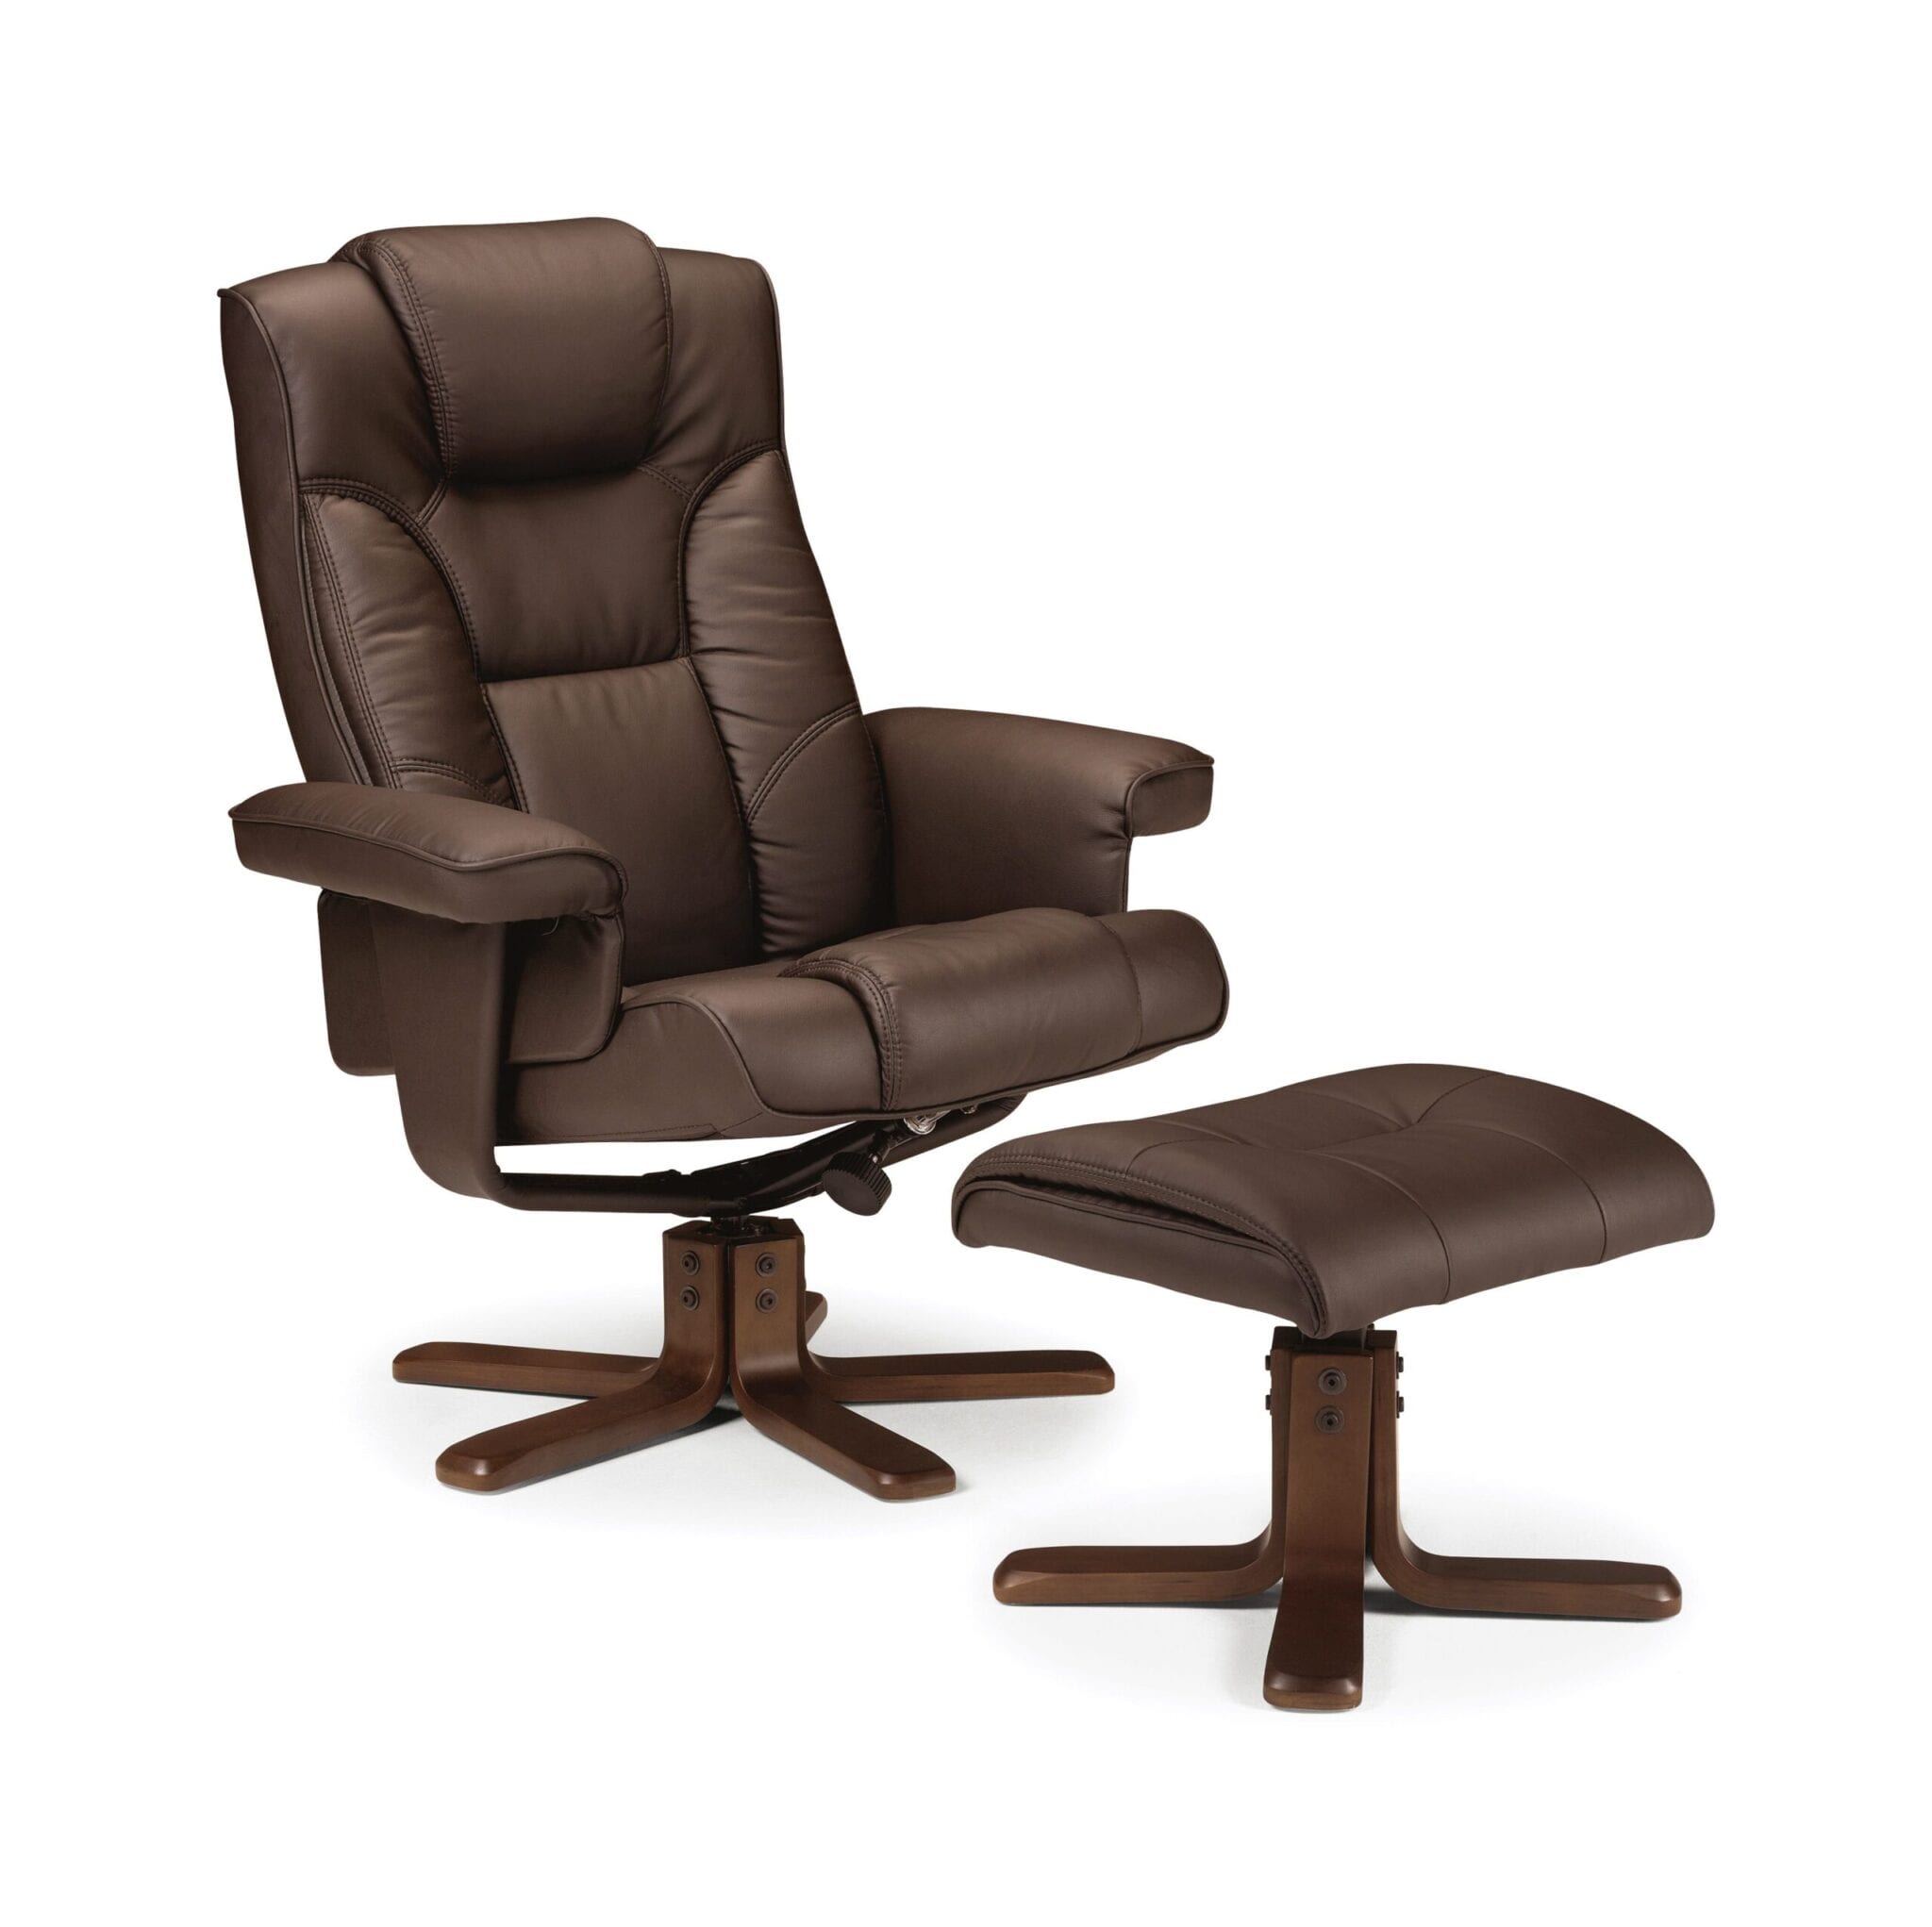 Camy Recliner & Stool Brown